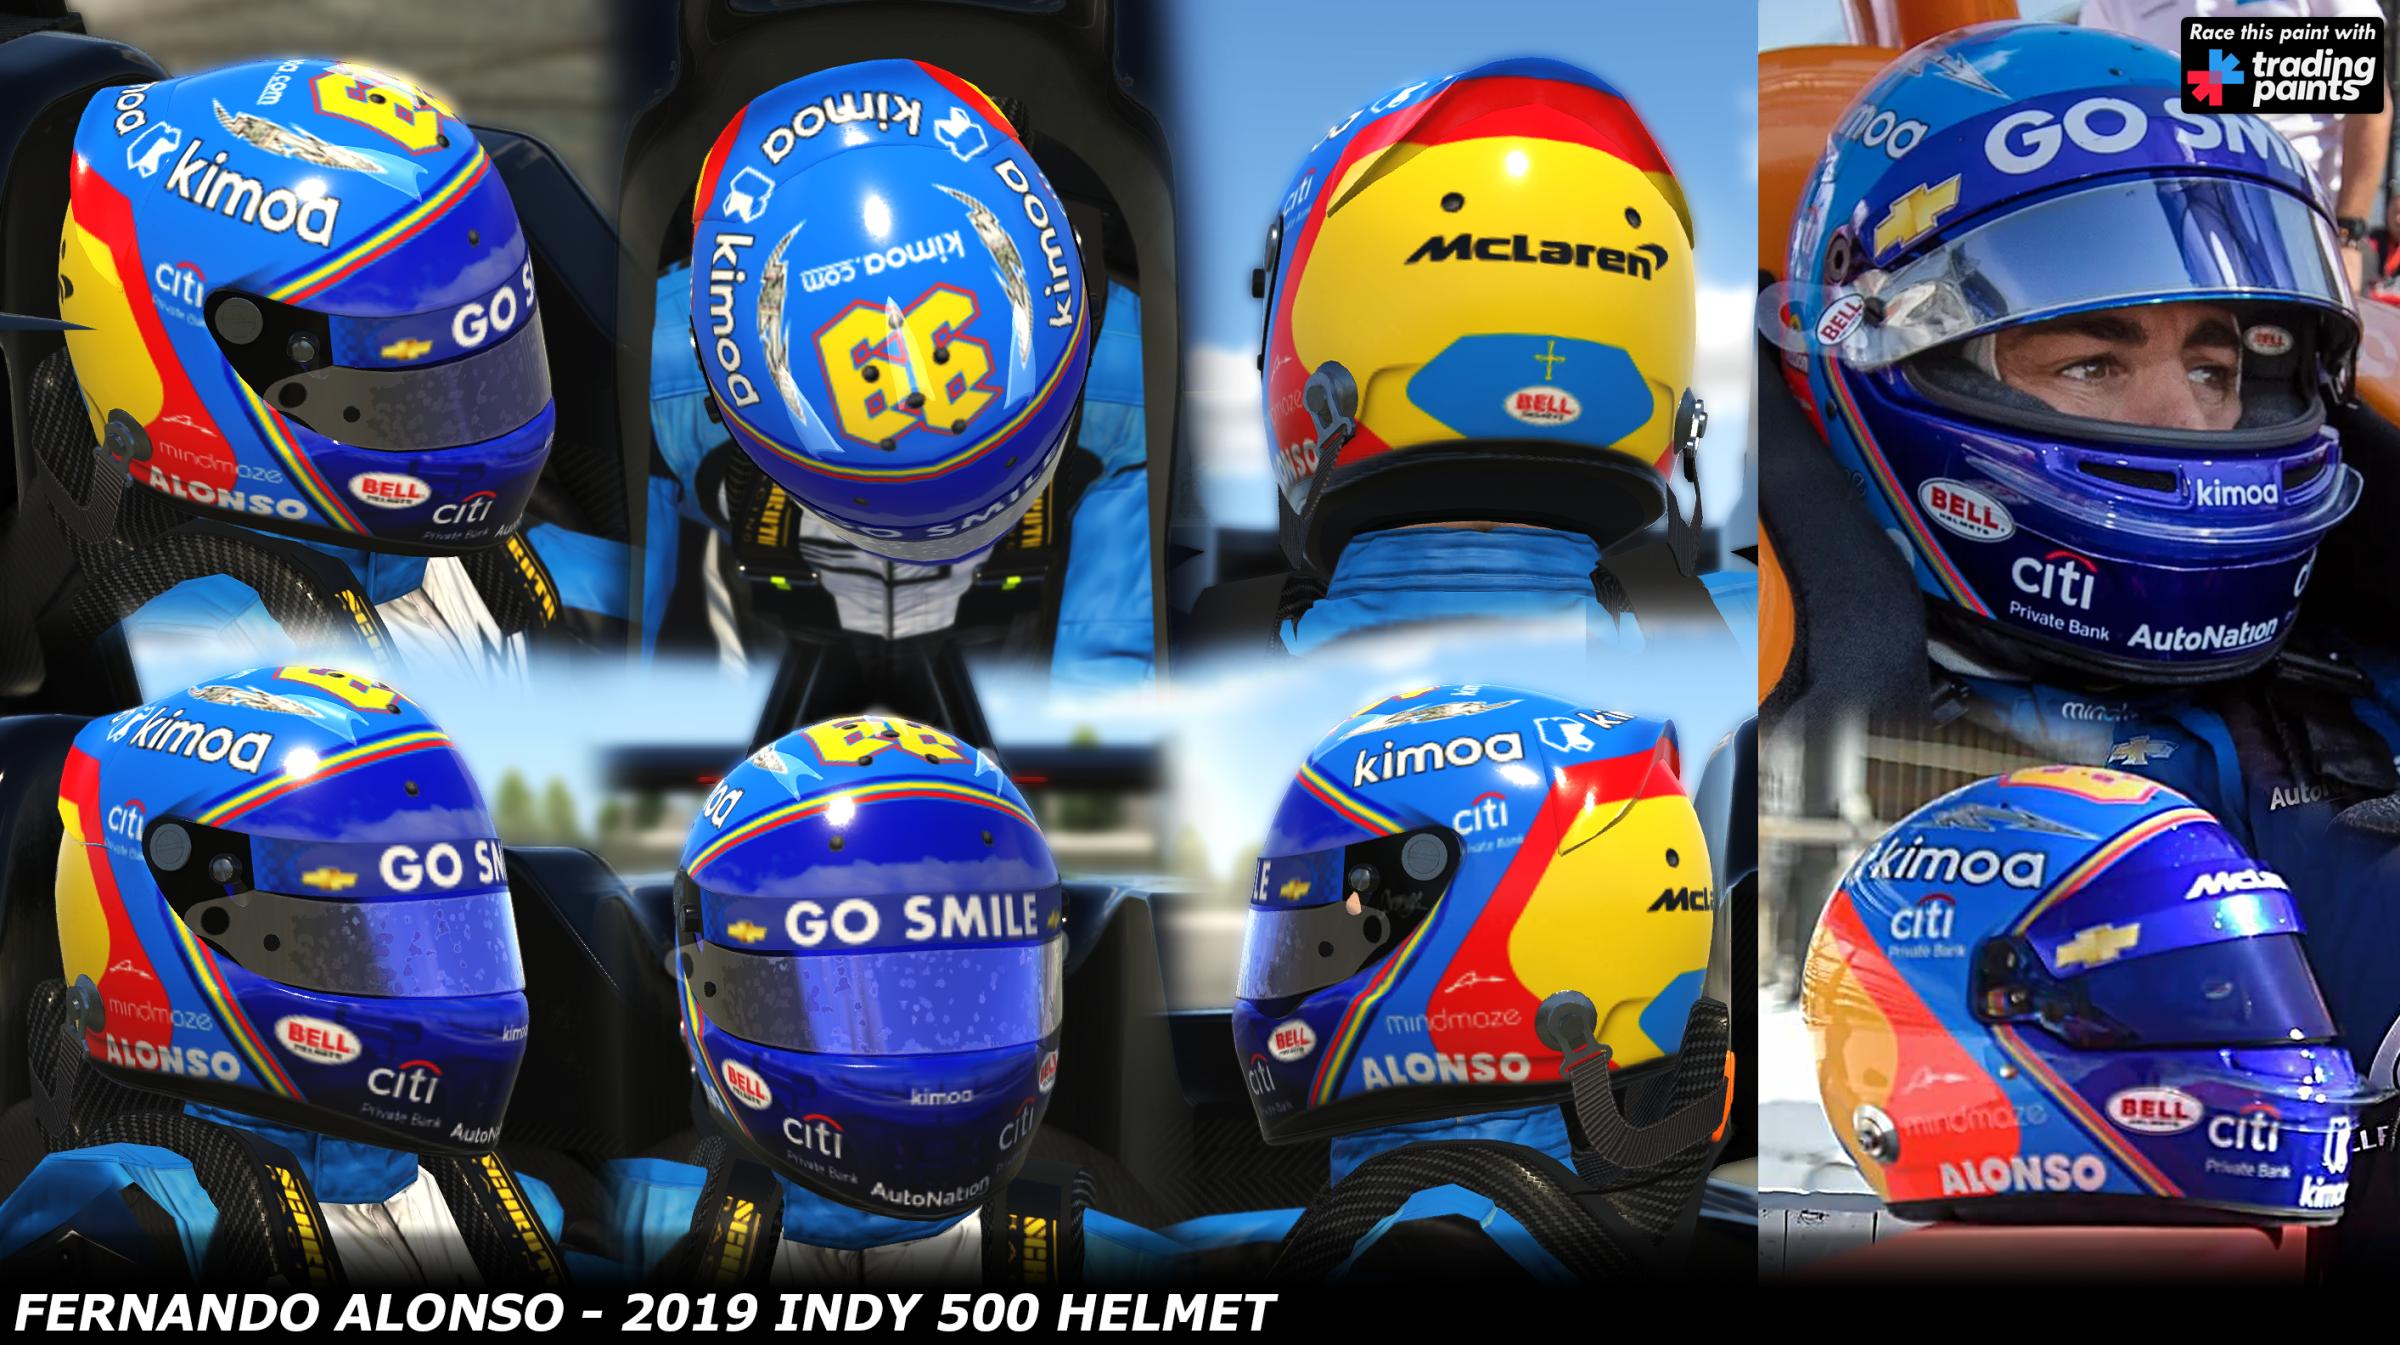 Revocation isolation select Fernando Alonso - Indy 500 2019 Helmet by George Simmons - Trading Paints